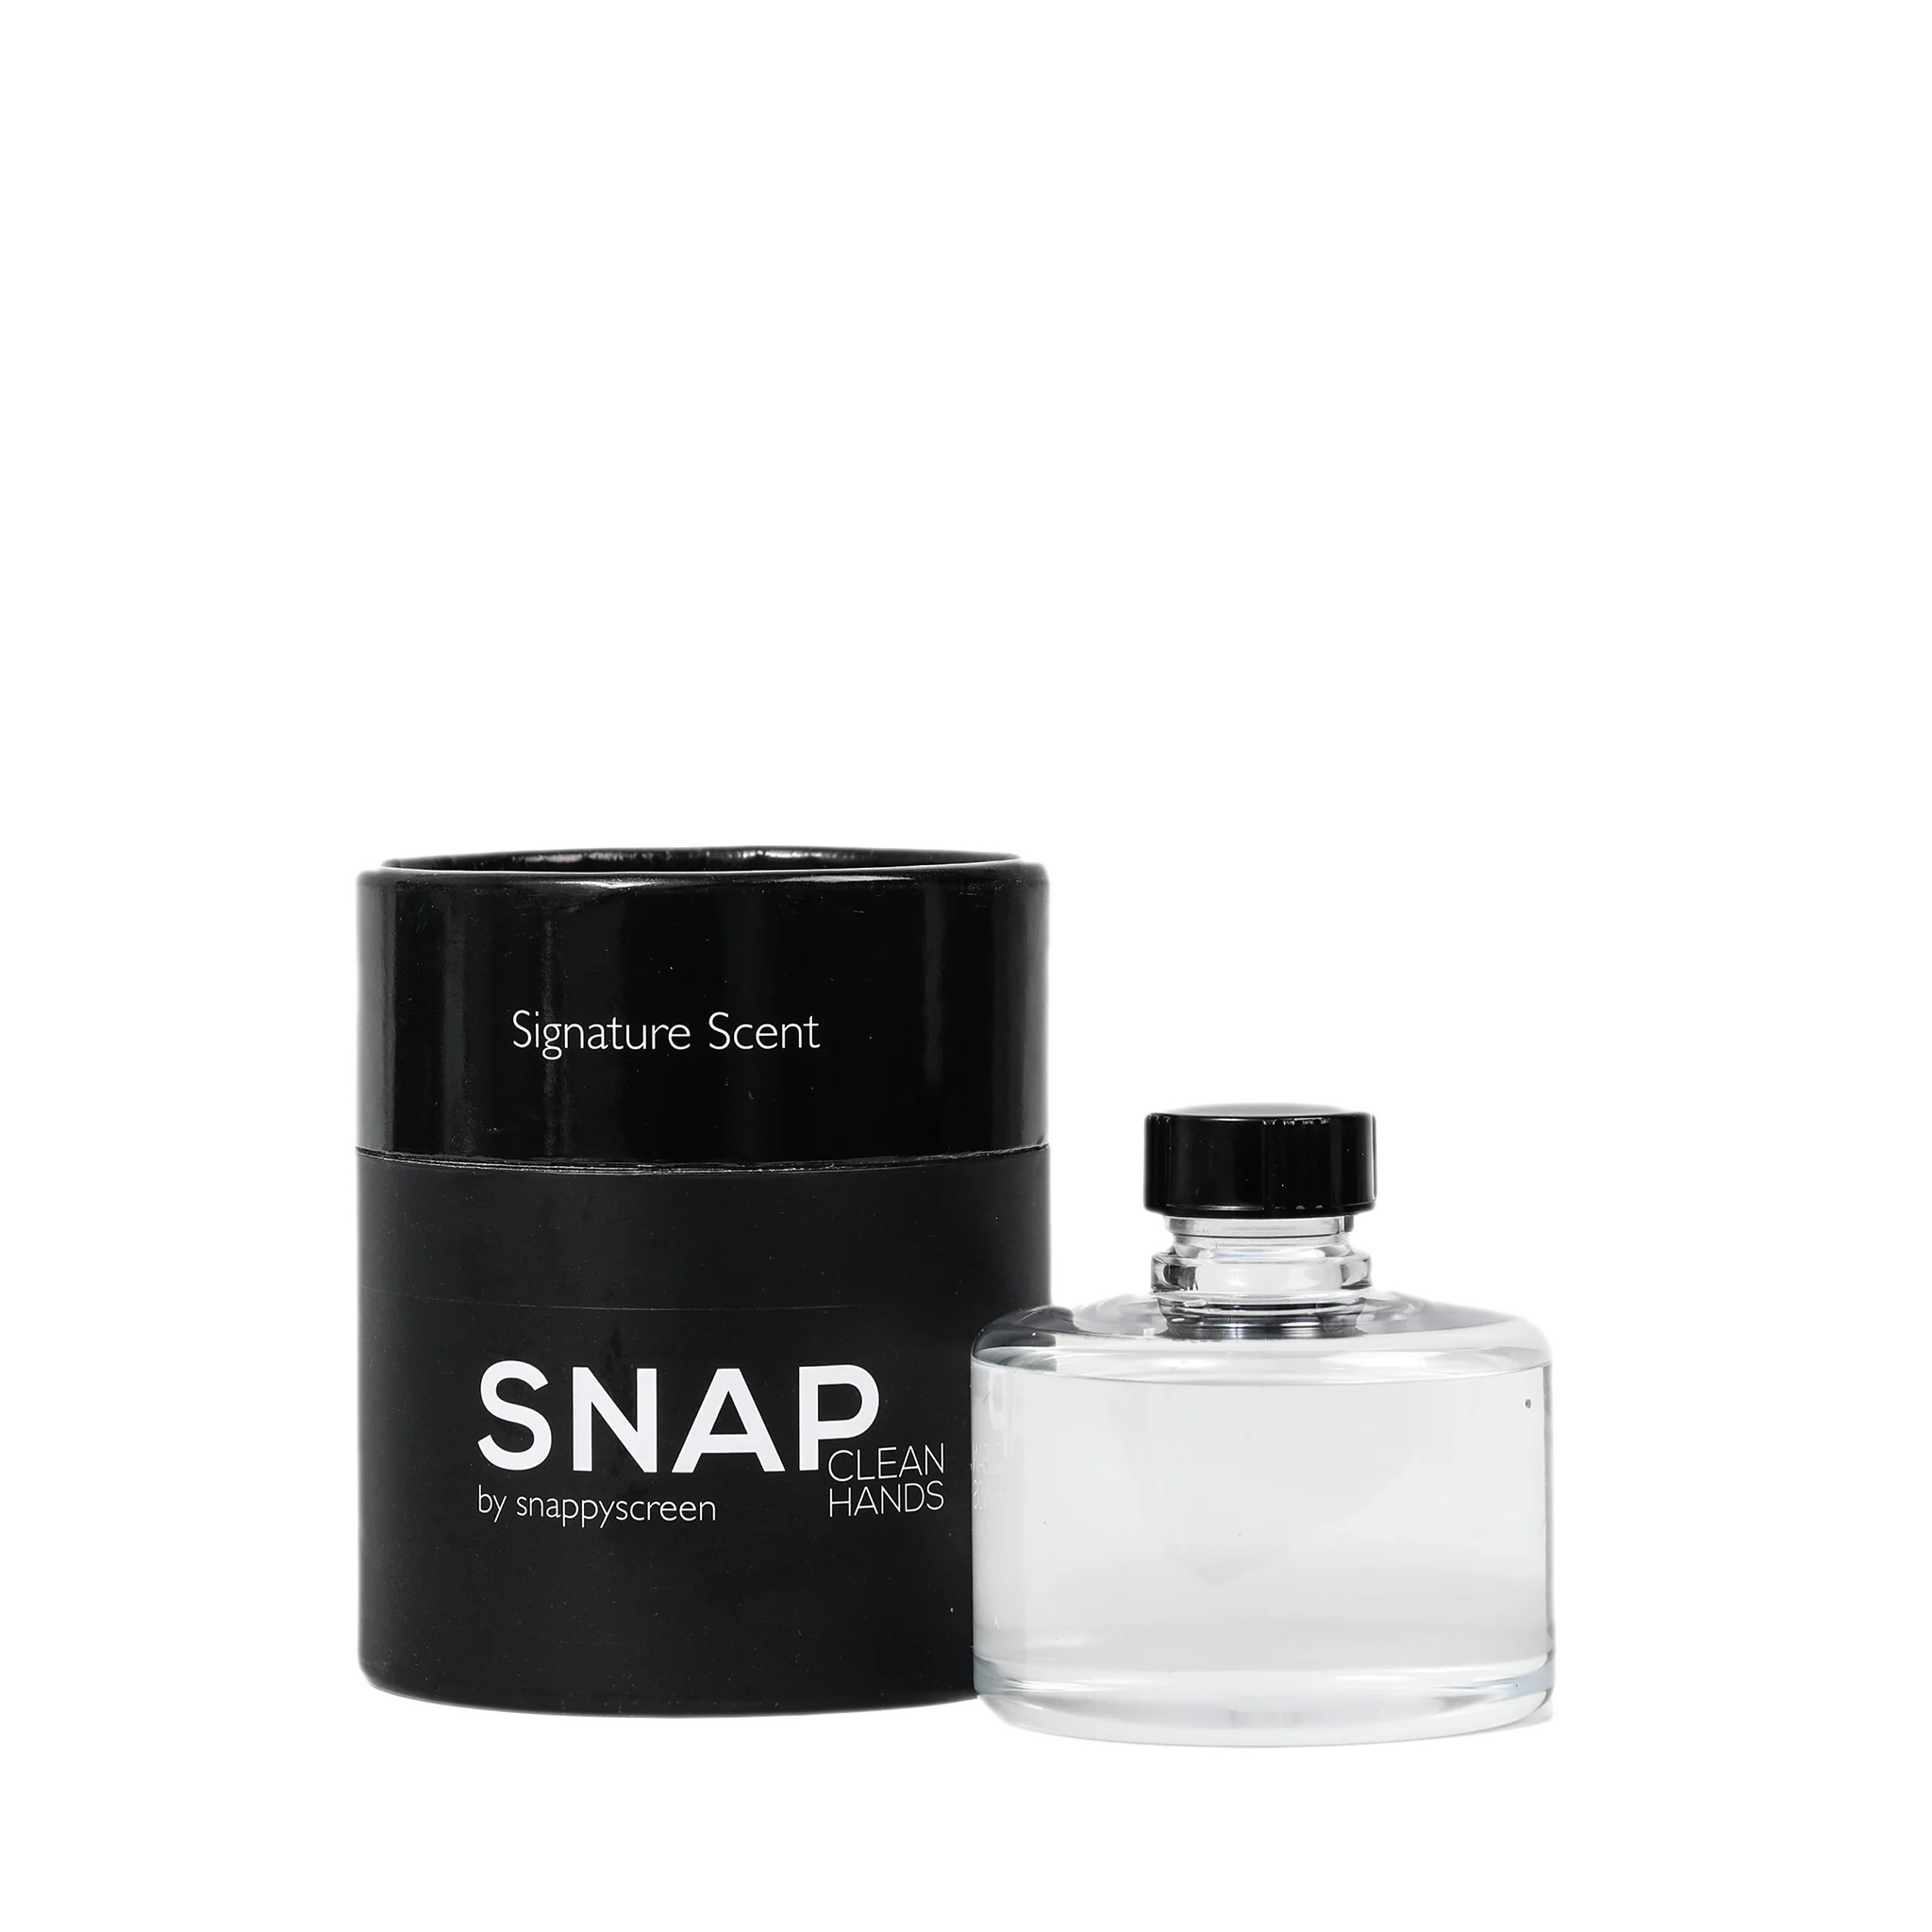 Snap Refill for Touchless Sanitizer - Signature Scent